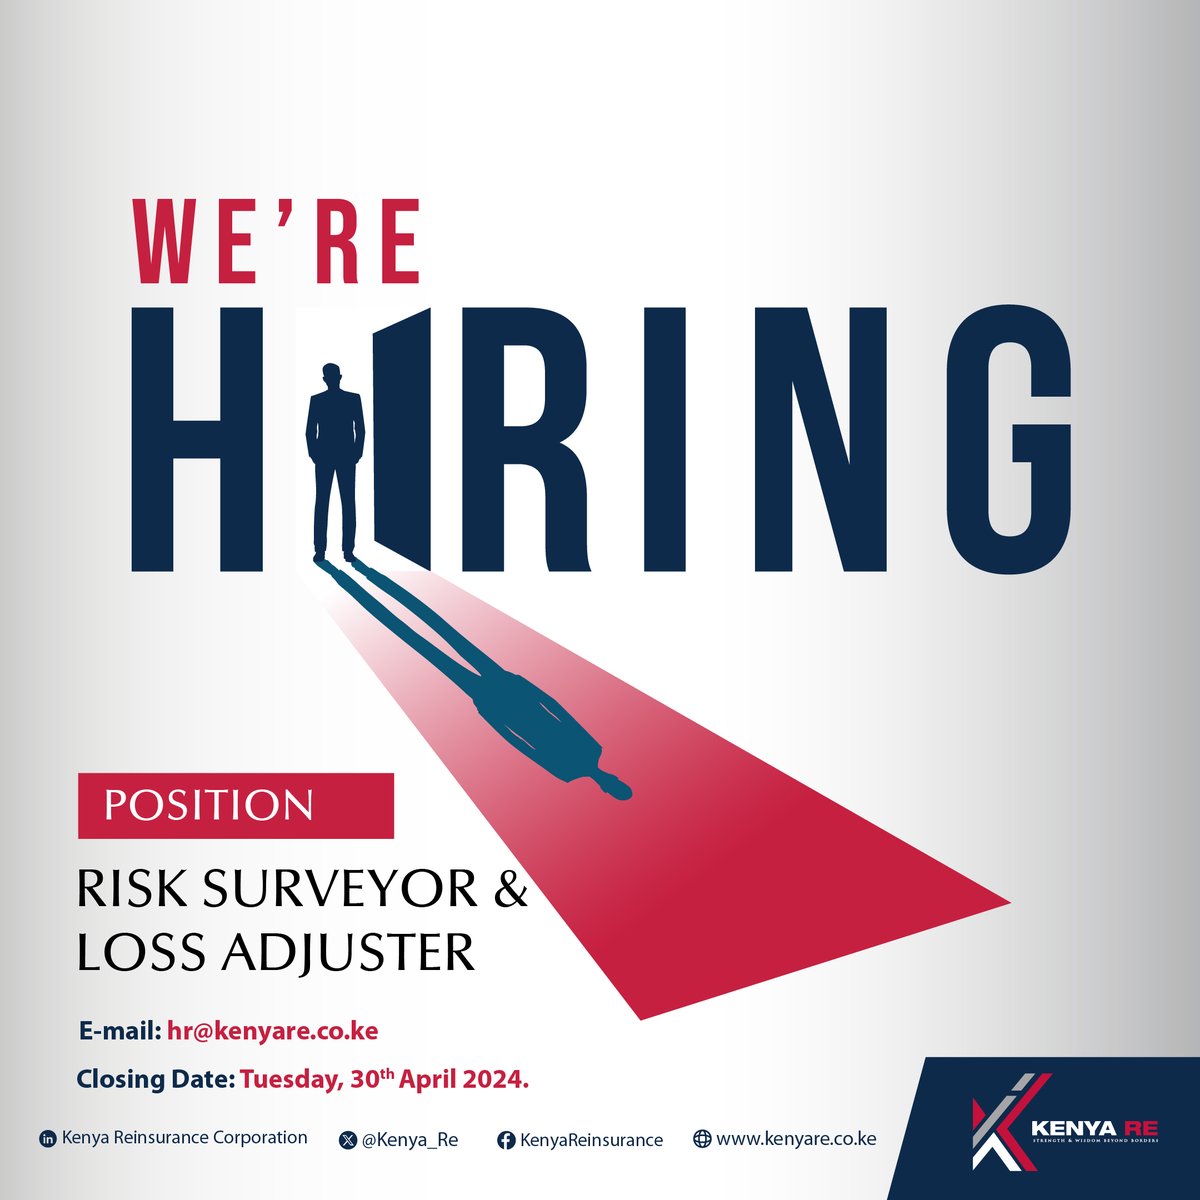 Ready to make a real impact? Apply now!
We're looking for passionate individuals to join our team.
Start your journey as a Risk Surveyor & Loss Adjuster at Kenya Reinsurance Corporation.

#risksurveyor #lossadjuster #insurancejobs #careers #KenyaJobs #IkoKaziKE #WithKenyaRe